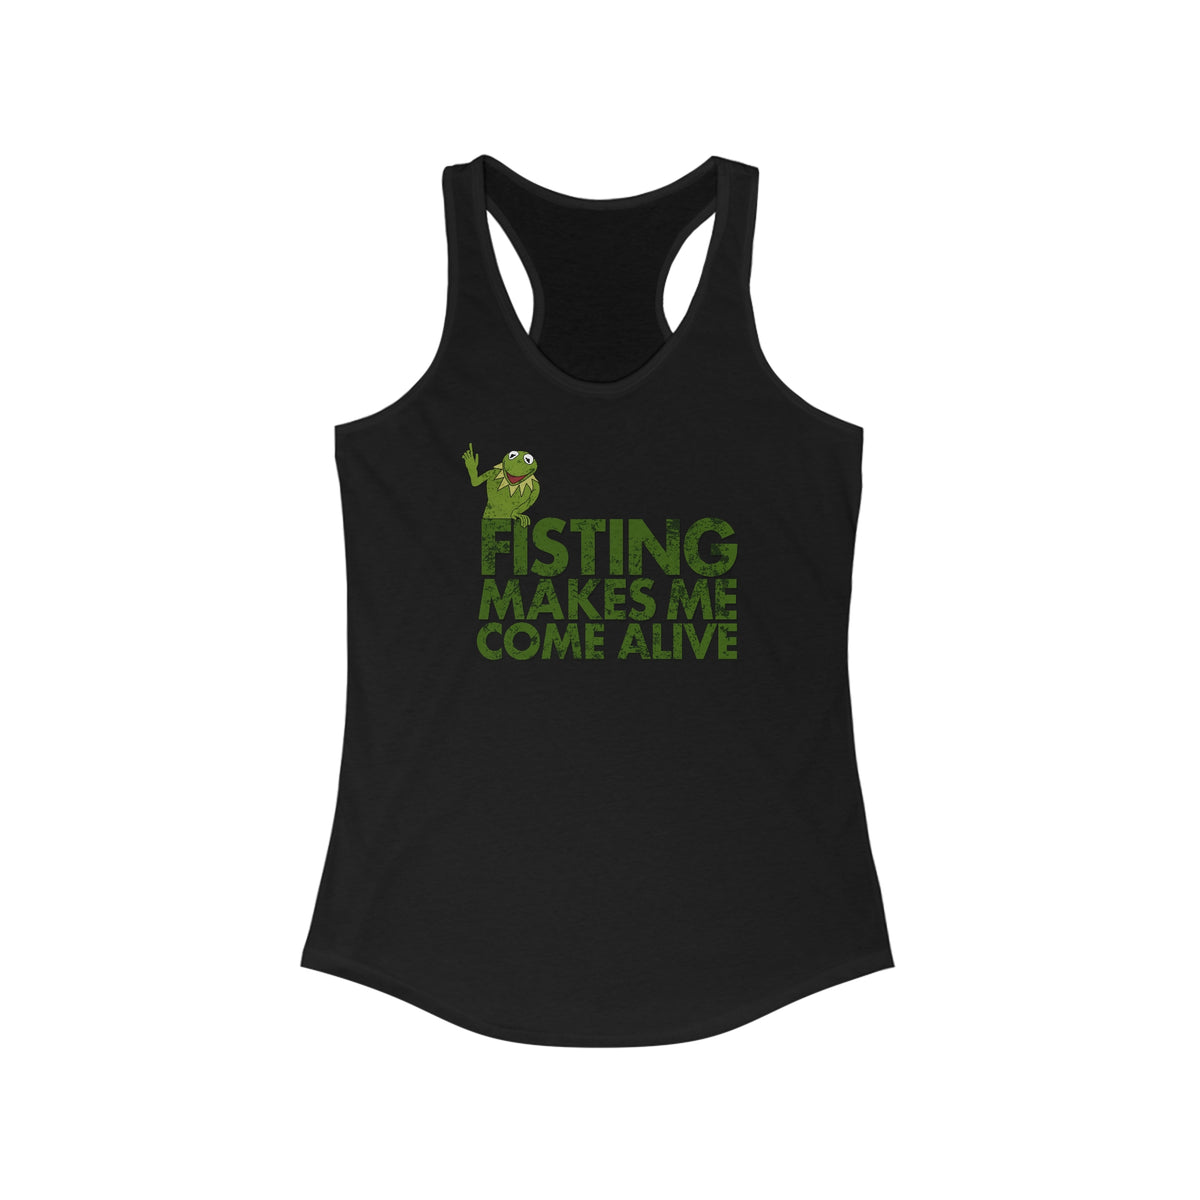 Fisting Makes Me Come Alive (Kermit The Frog) - Women’s Racerback Tank